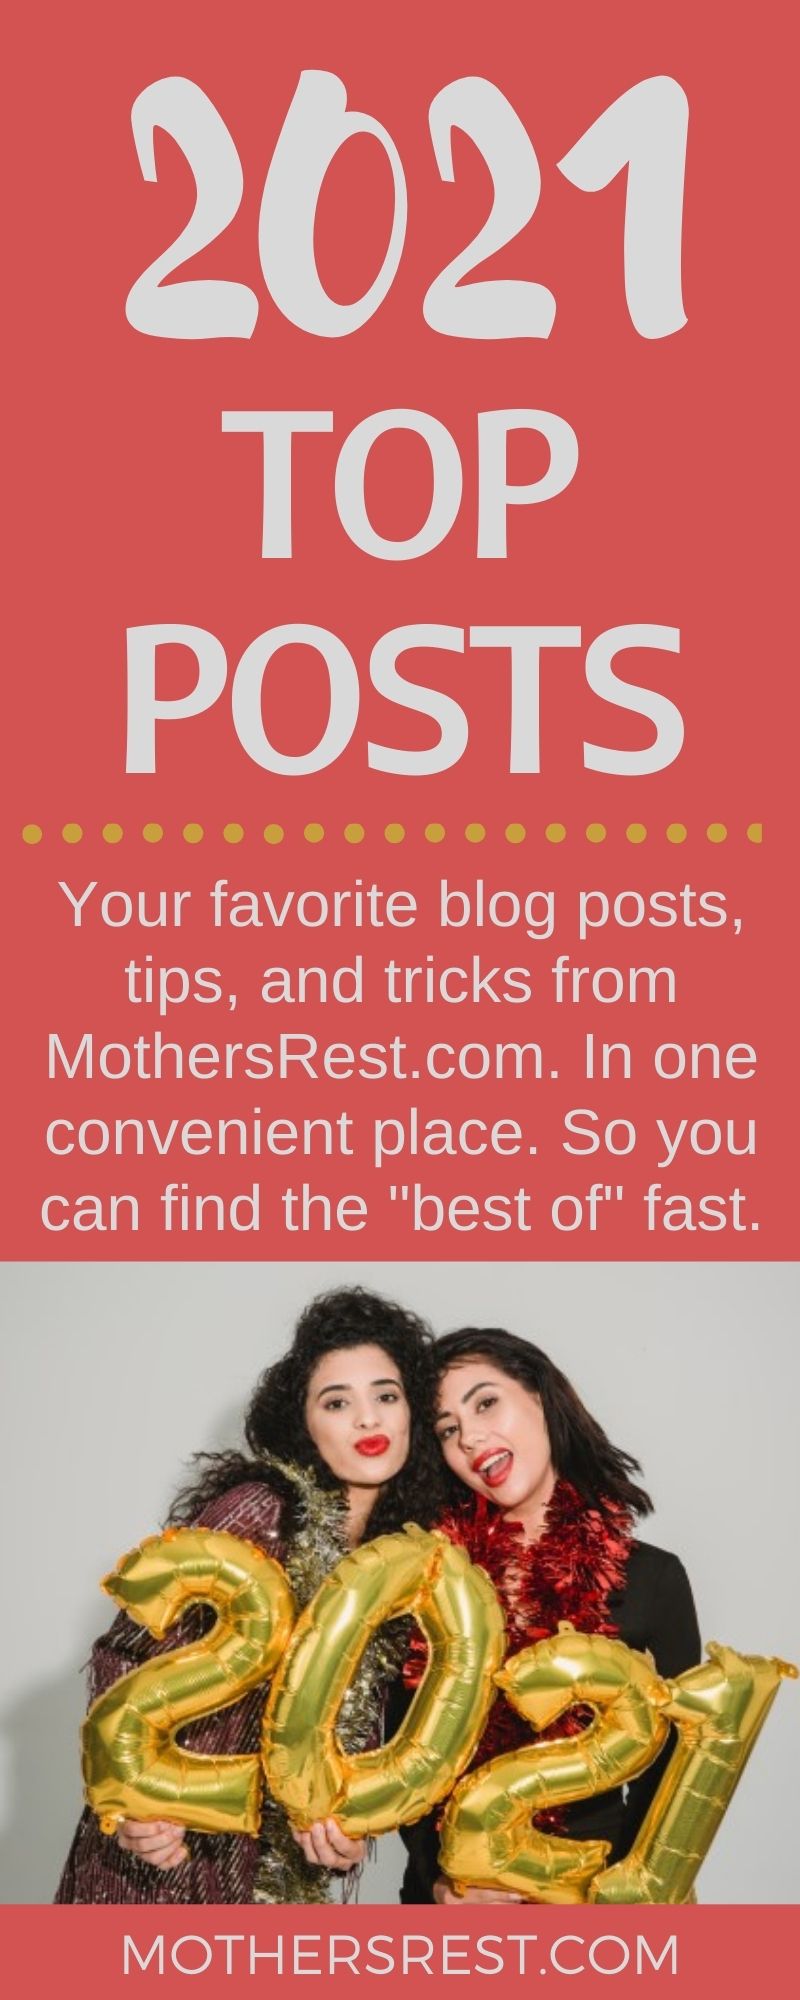 Your favorite blog posts, tips, and tricks from MothersRest.com. In one convenient place. So you can find the BEST OF fast.